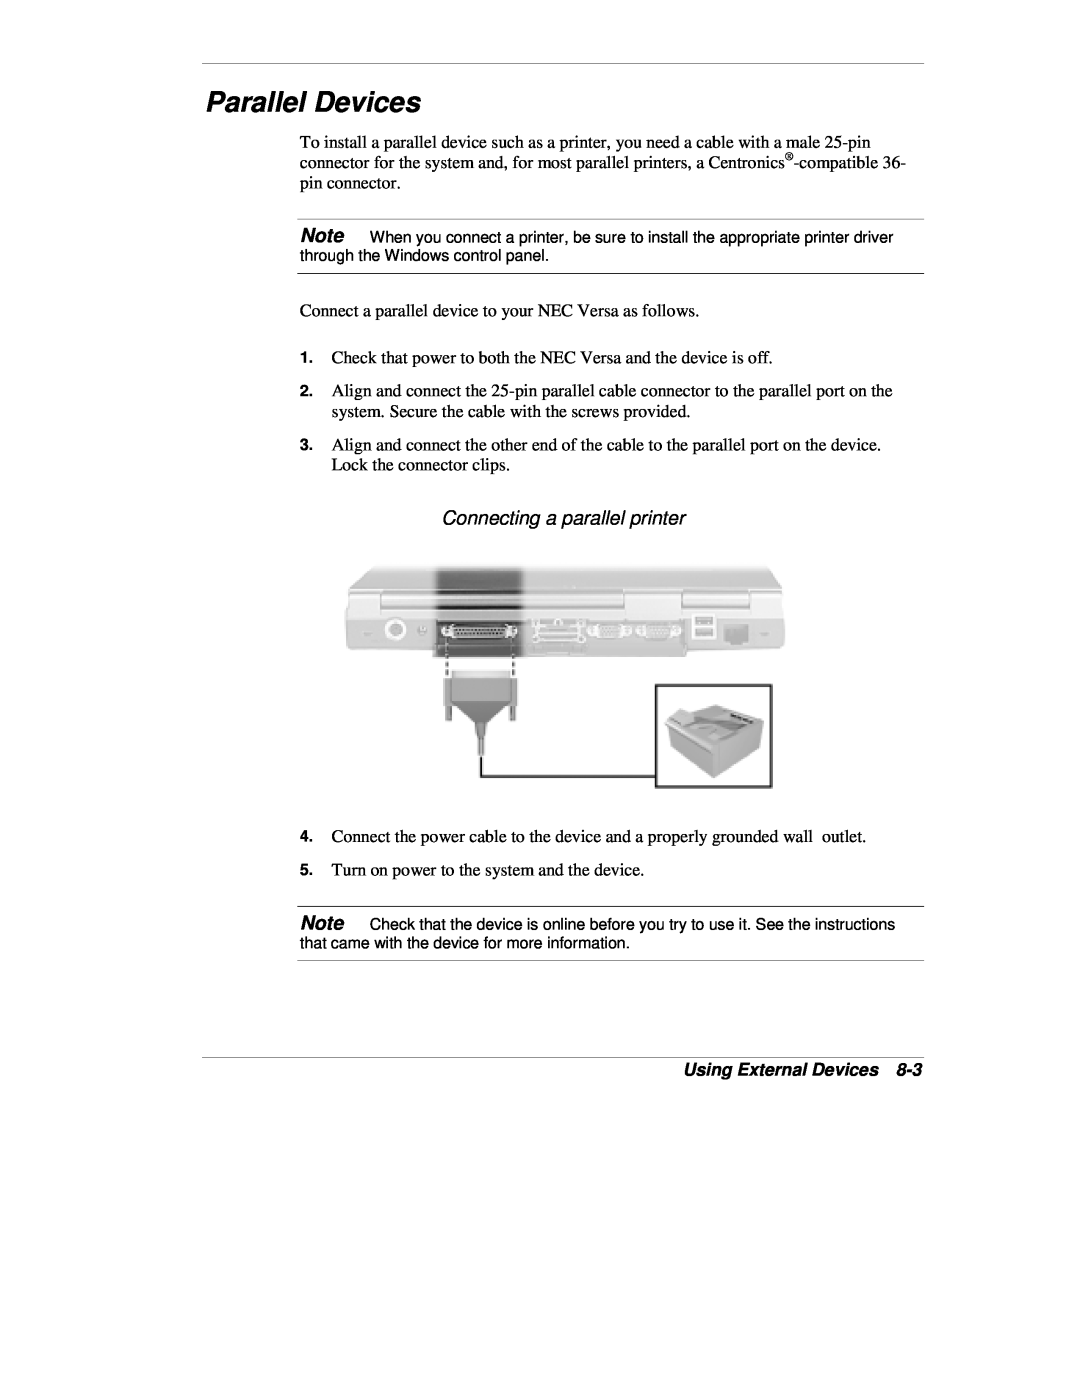 NEC VX manual Parallel Devices, Connecting a parallel printer, Using External Devices 